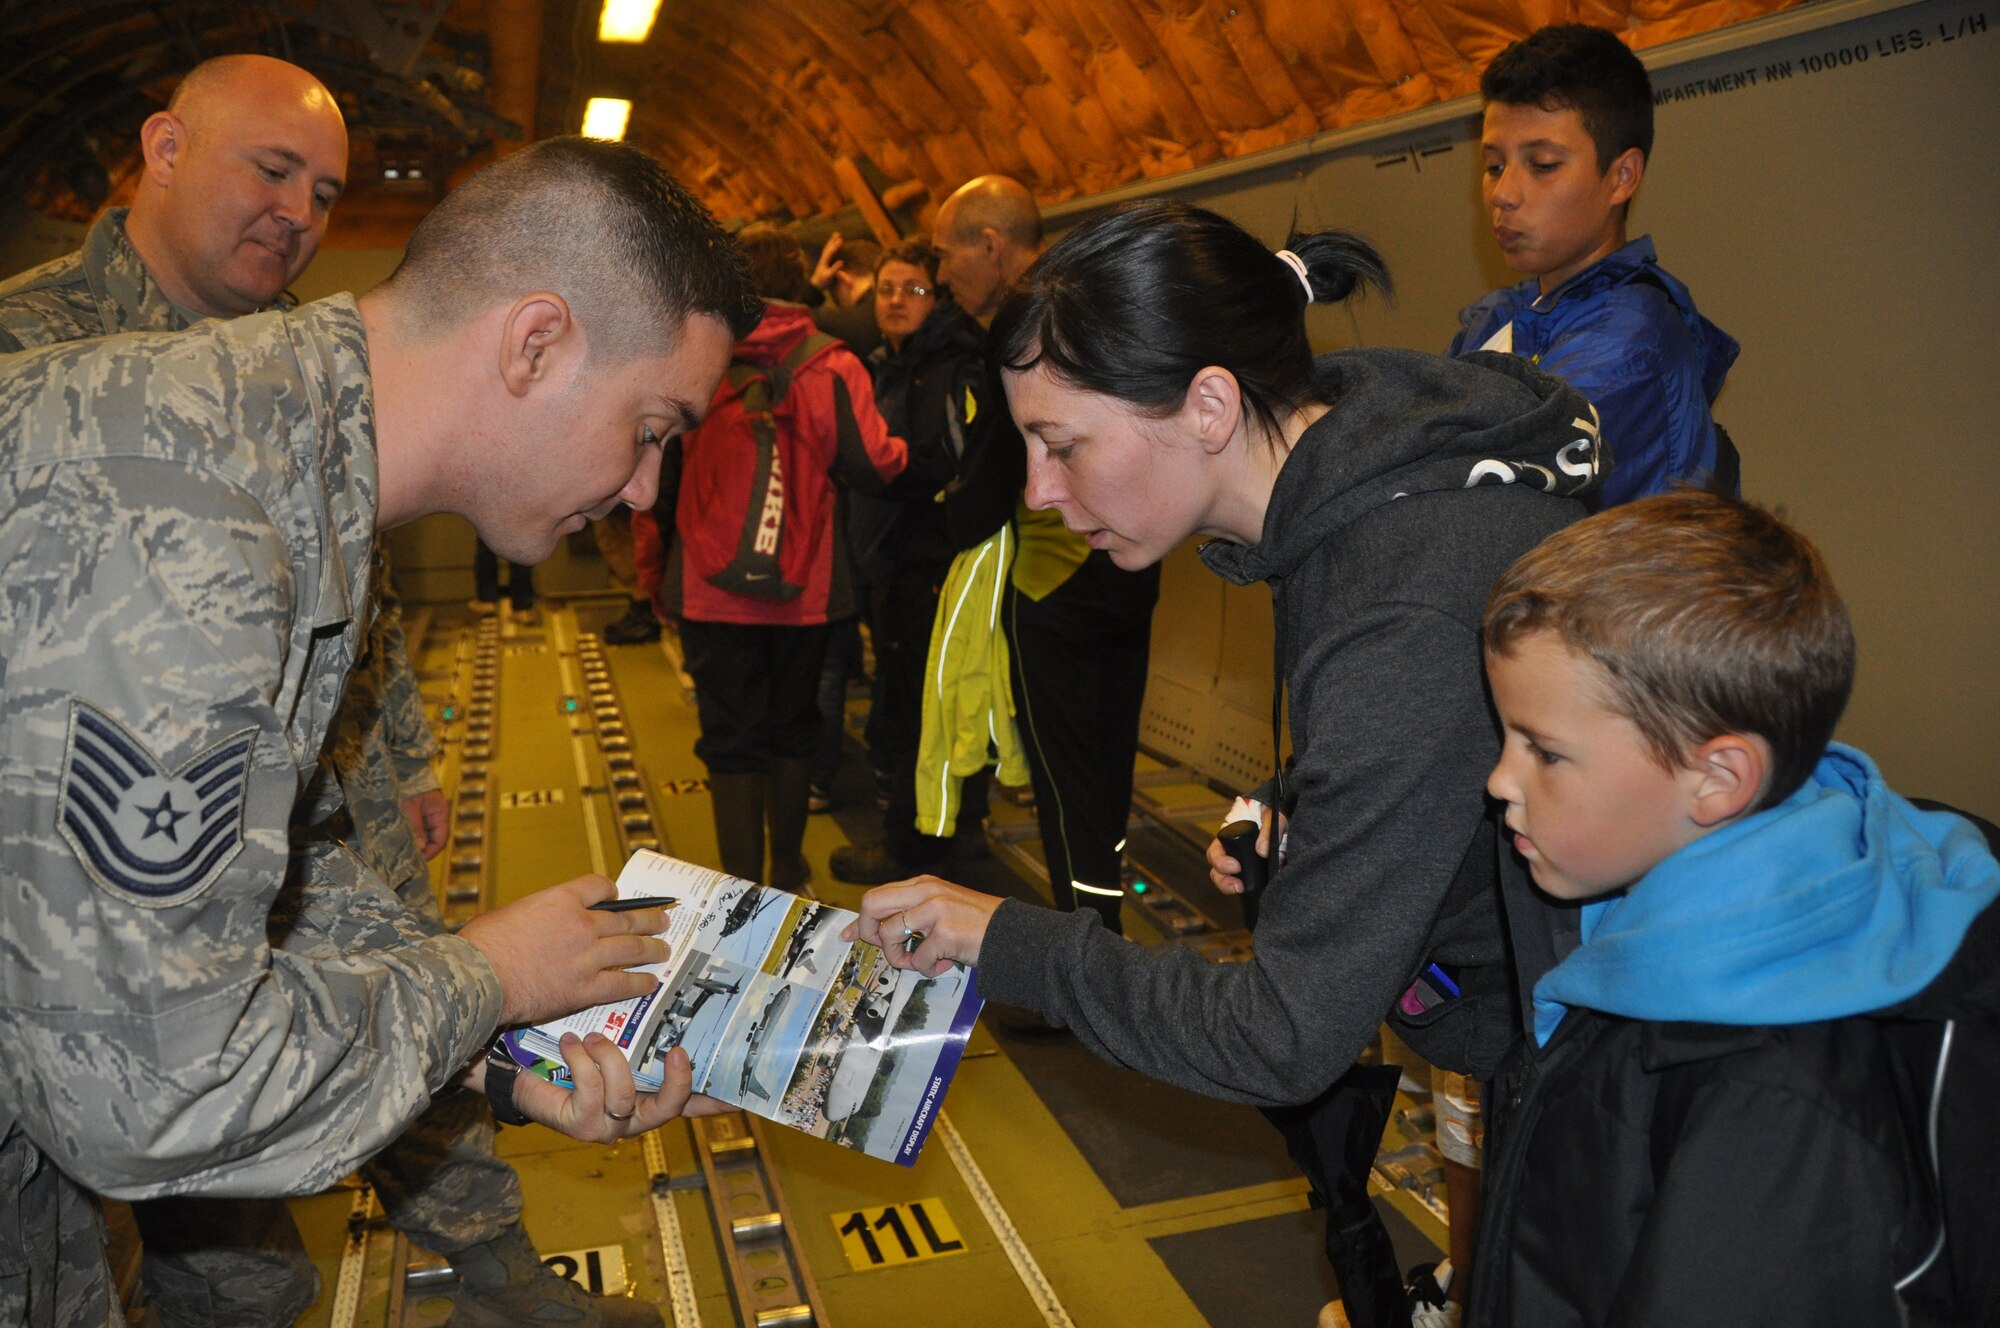 Tech. Sgt. Adam Ligon, a Reserve Airman assigned to Joint Base McGuire-Dix-Lakehurst in New Jersey, finds the correct photo to sign in the Royal International Air Tattoo souvenir book July 7. Thousands of air show spectators toured the KC-10 Extender during the annual event held at RAF Fairford in Gloucestershire, United Kingdom. (U.S. Air Force photo/Master Sgt. Donna T. Jeffries)